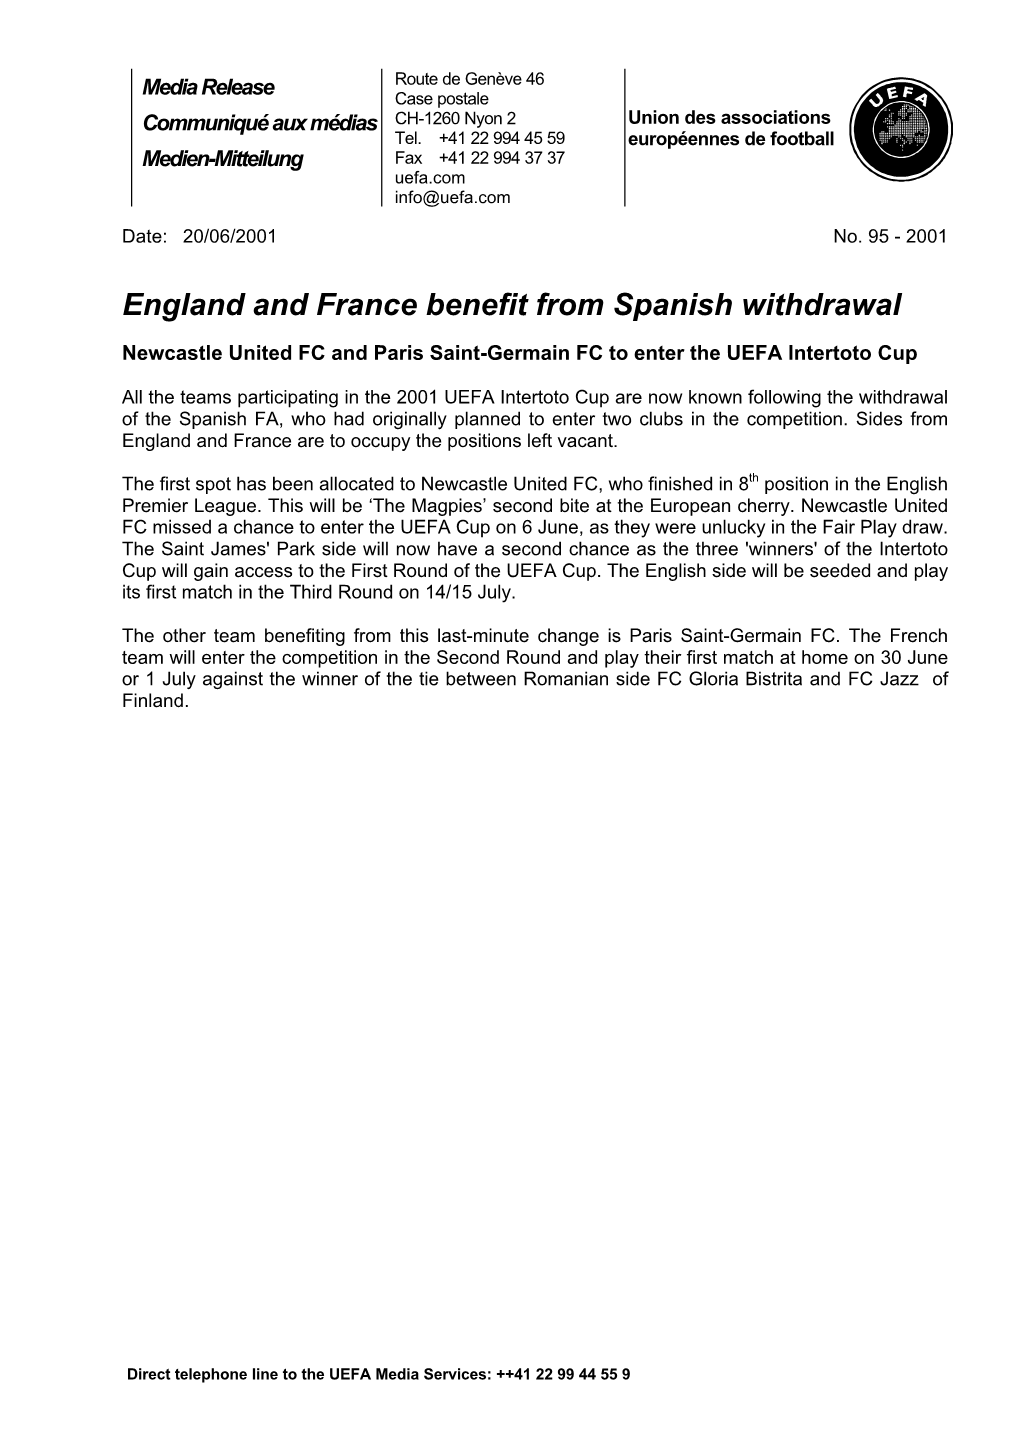 England and France Benefit from Spanish Withdrawal